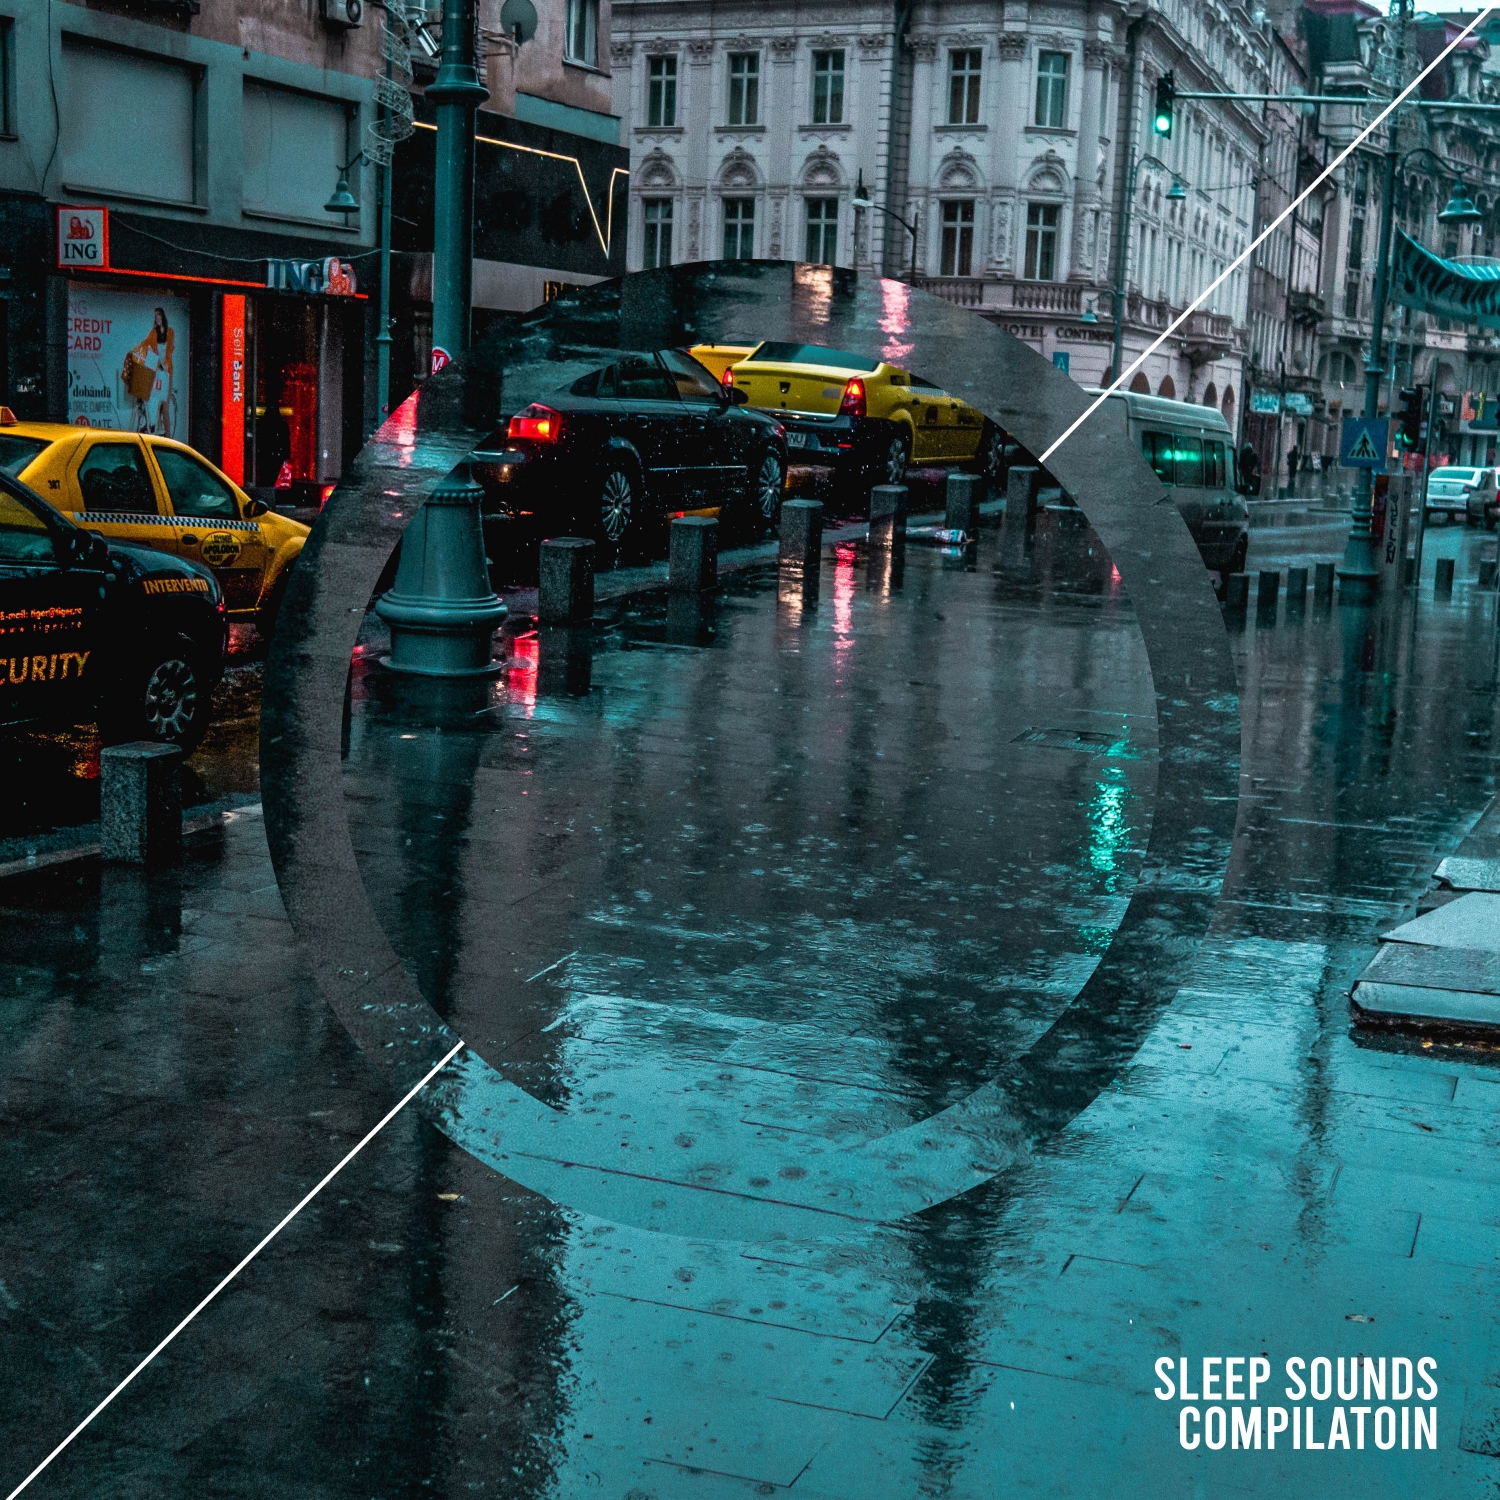 2017 Compilation of Sleep Sounds of Rain and Nature